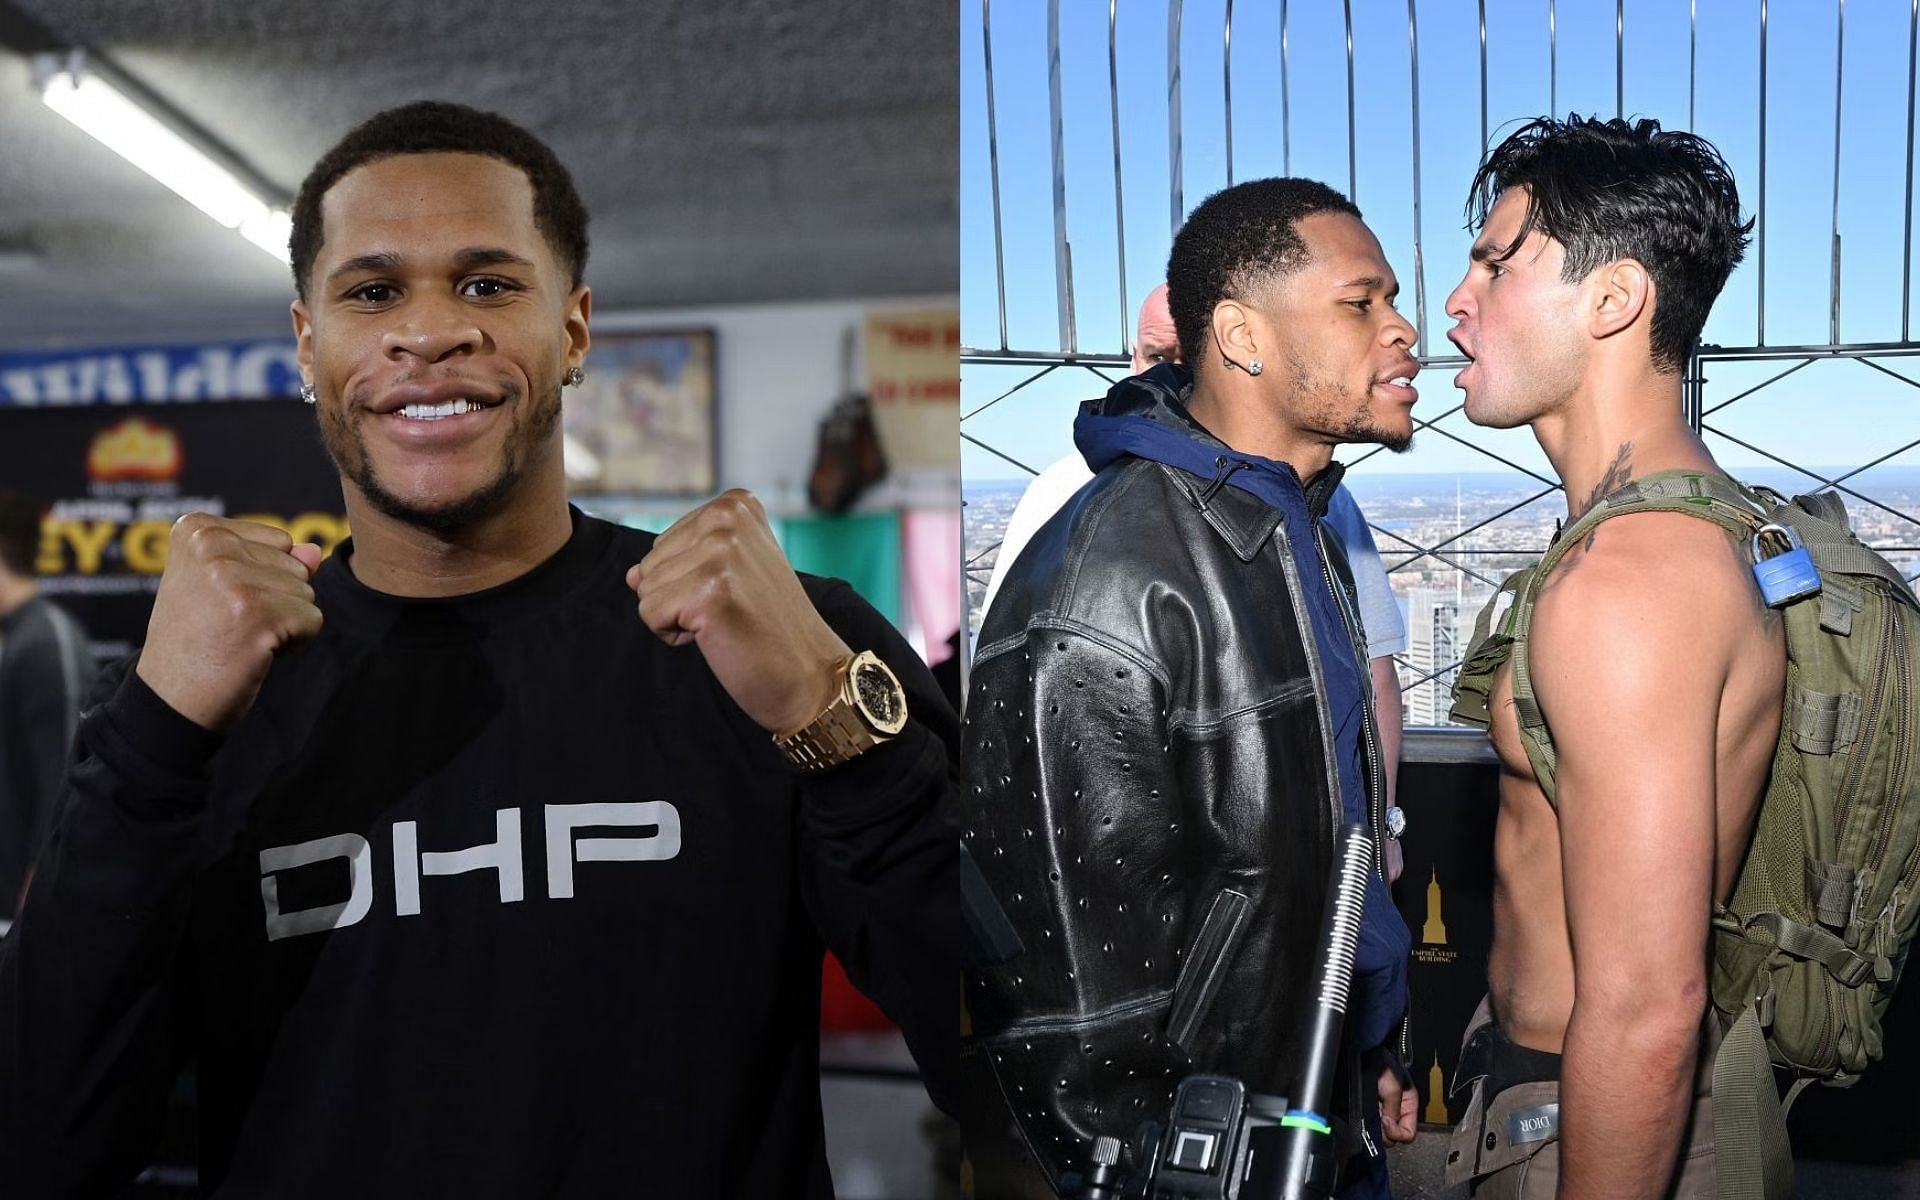 Devin Haney (left) shares weight concerns for Ryan Garcia after their heated face-off (right) [Images Courtesy: @GettyImages]